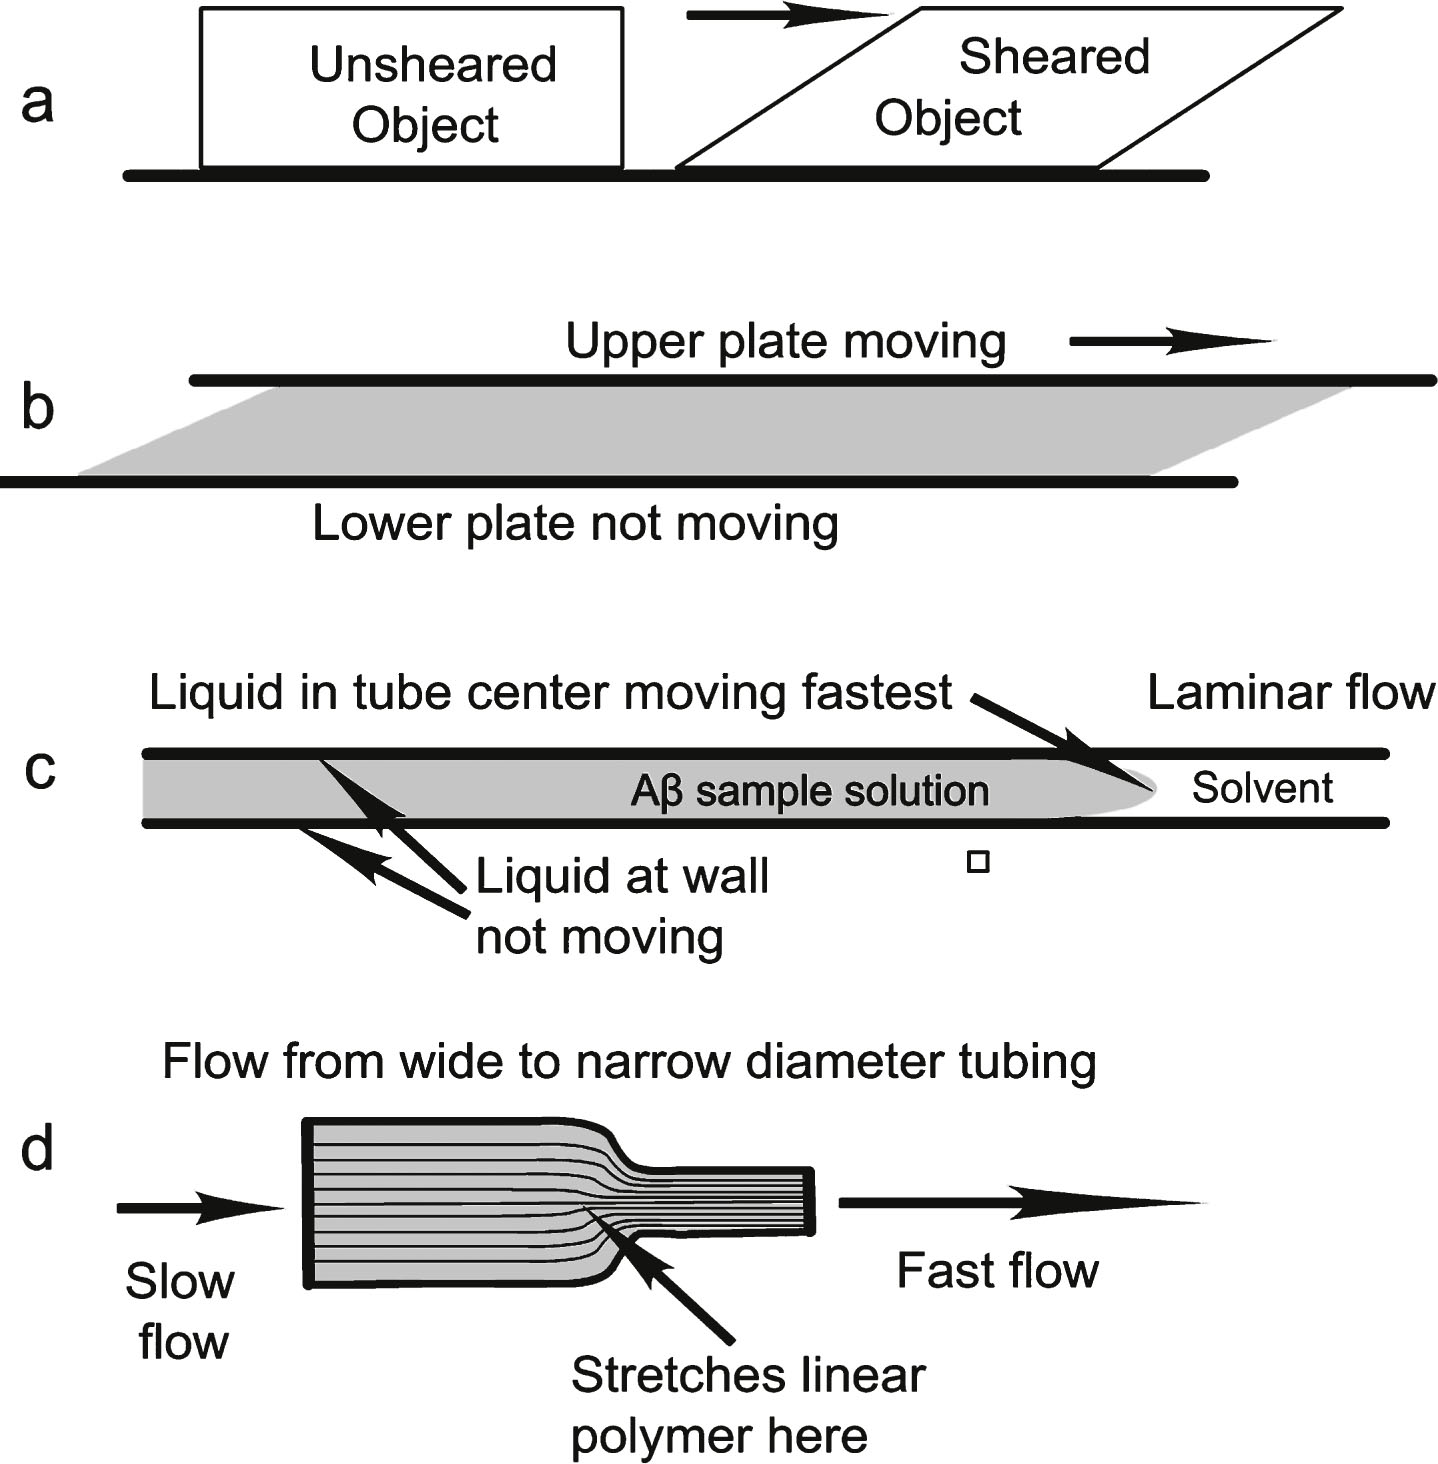 Different types of shear (cross sections): (a) Sheared solid; (b) liquid between two plates, one stationary; (c) liquid flowing in a capillary or two stationary plates; (d) liquid flowing through tubes with different diameters. Laminar liquid shear is found in (b) and (c). Both laminar and extensional shear are found in (d).